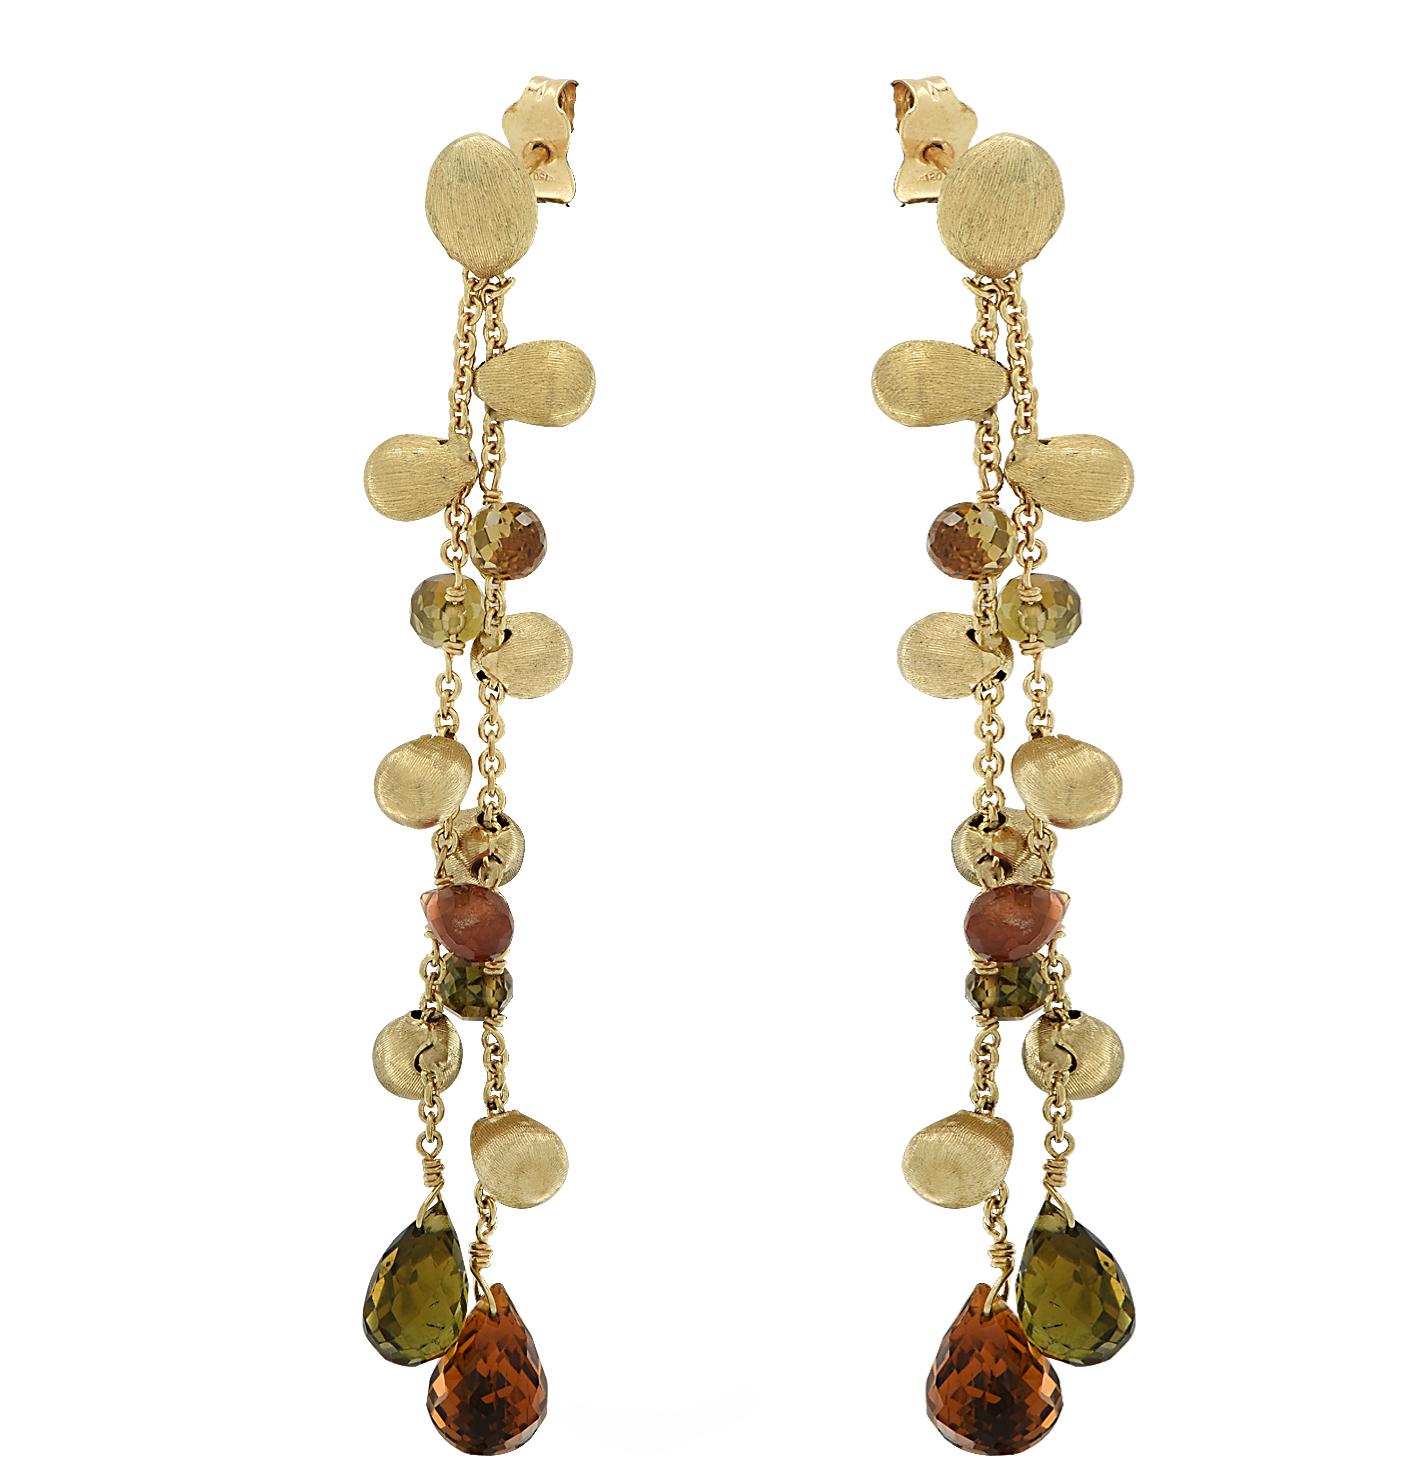 Stunning Marco Bicego Paradise double strand dangle earrings crafted by hand in Italy in 18 karat yellow gold detailed with peridot and citrine briolettes weighing approximately 10 carats total, interspersed with hand engraved yellow gold